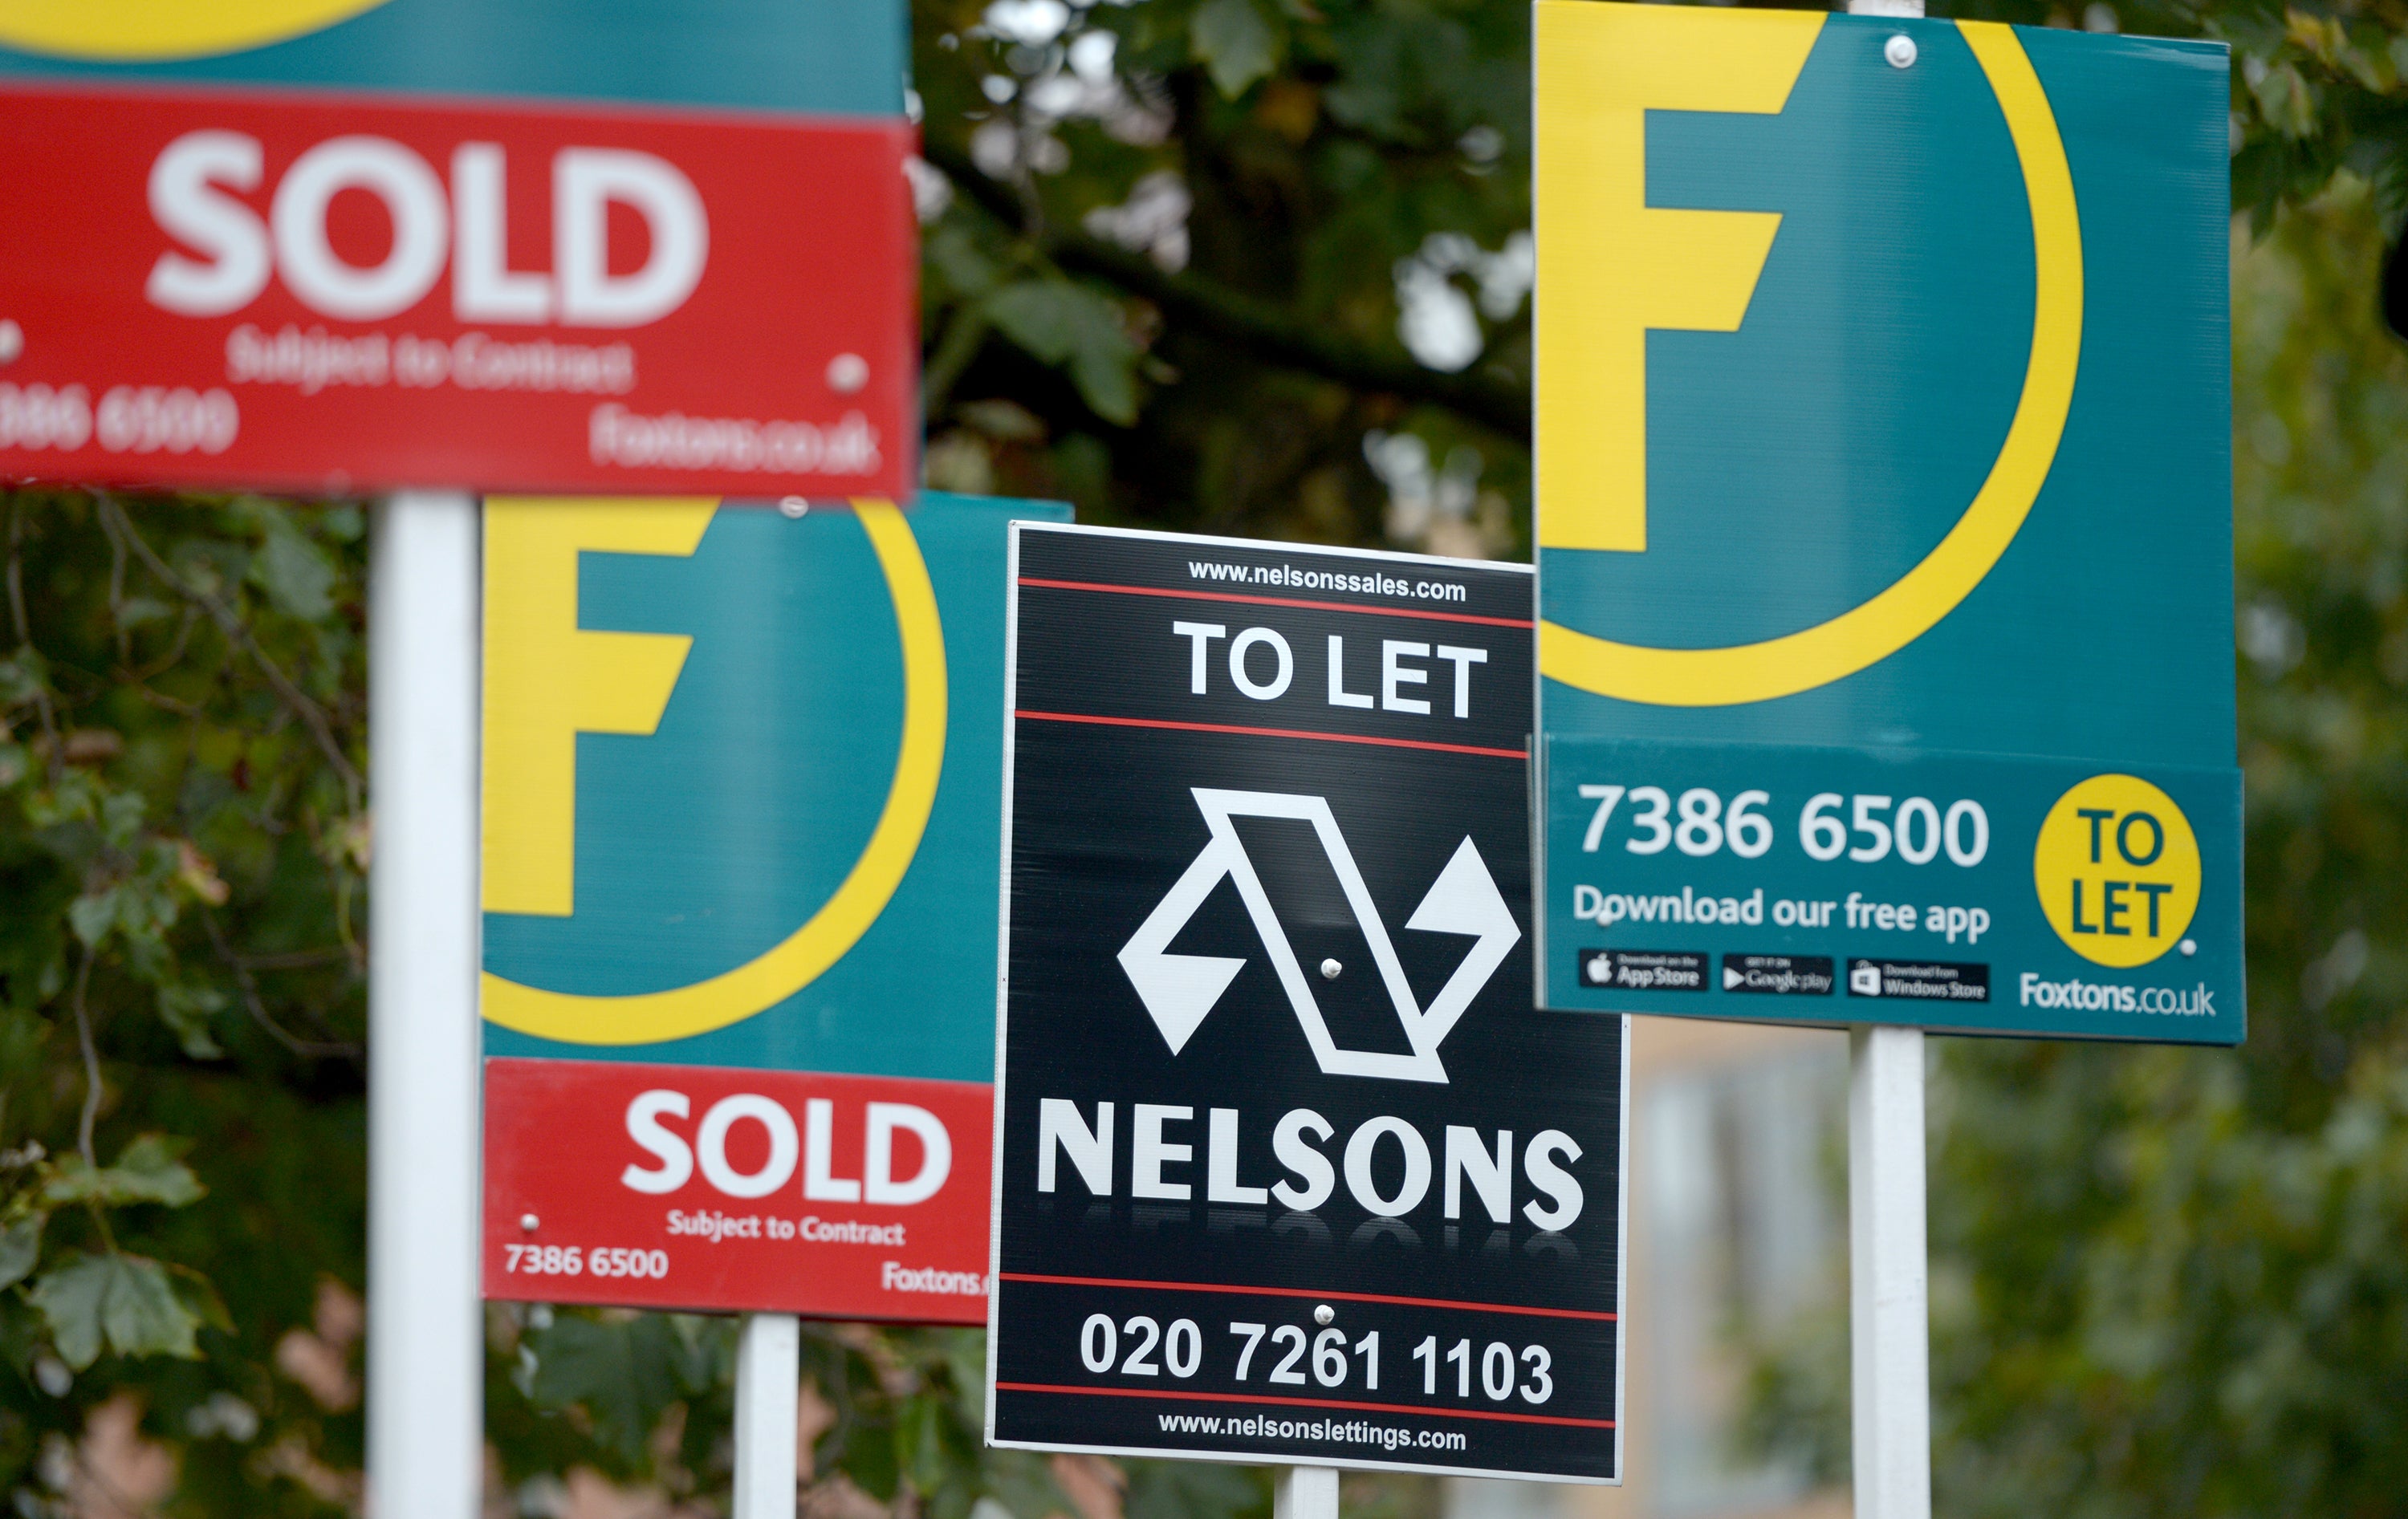 Up, up and away: Rightmove says house prices hit a rare full house this month